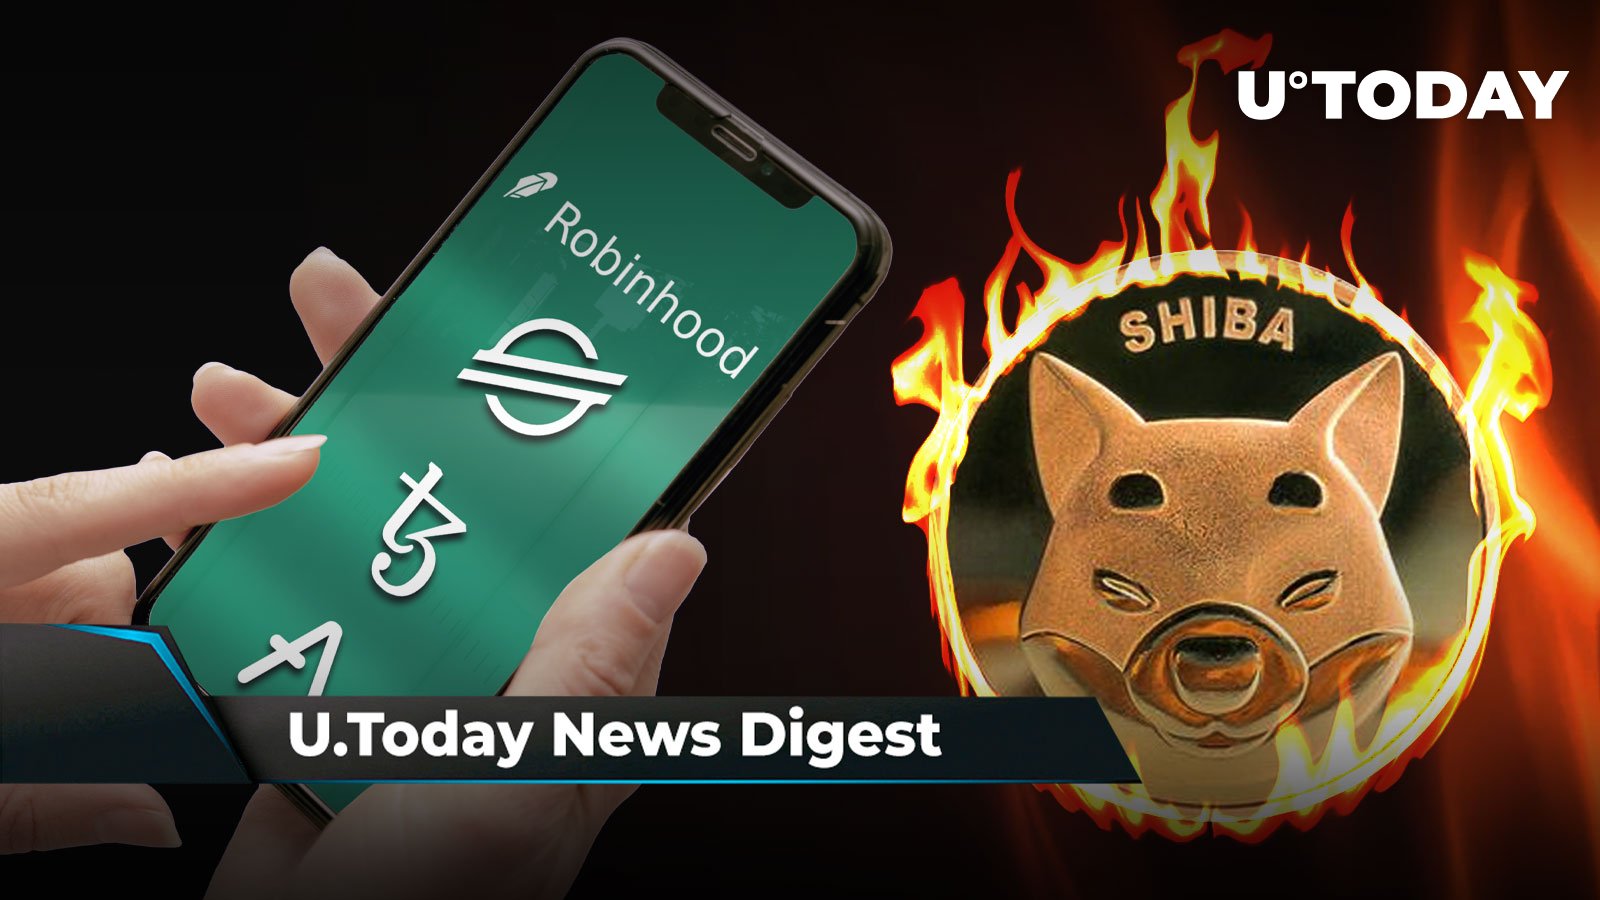 shib-burn-rate-spikes-14-267-xrp-accounts-nearing-4-35-million-robinhood-enables-xlm-xtz-and-aave-transfers-crypto-news-digest-by-u-today